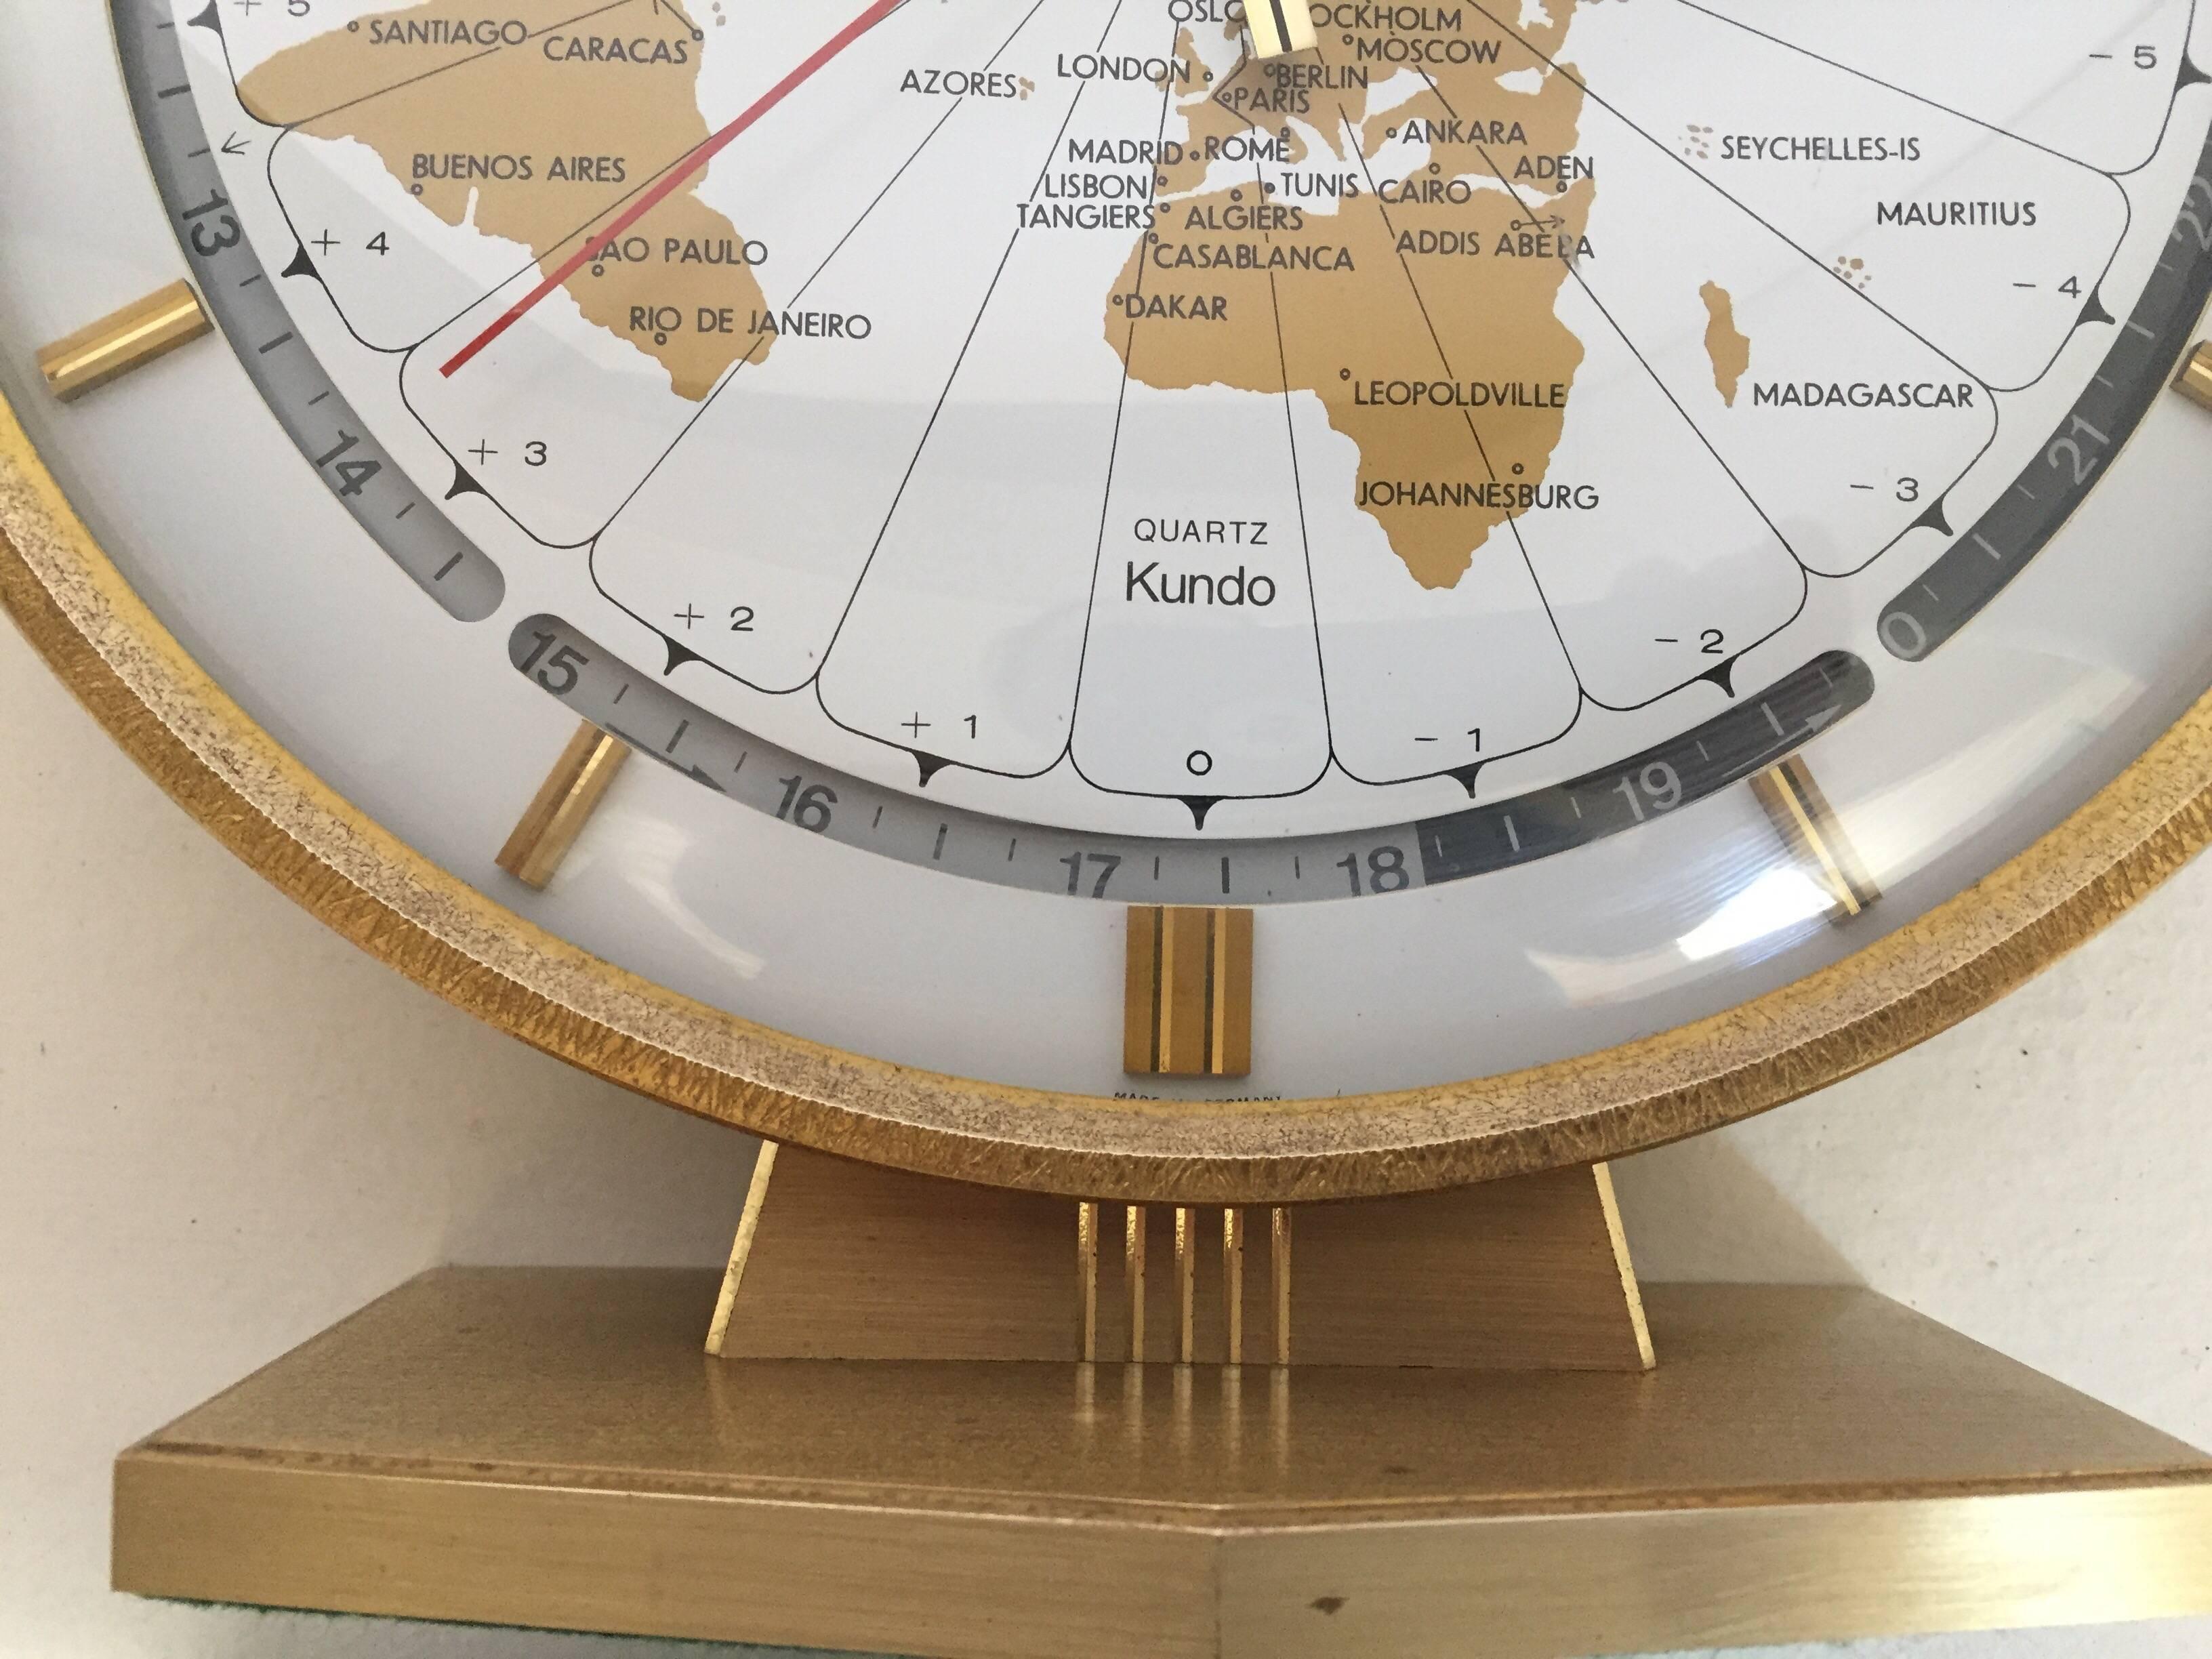 Large Kieninger & Obergfell modernist table world timer zone clock, 1960s
Unique brass round world clock by Kundo Automatic made in West Germany, circa 1960s.
Wonderful round clock with large 9